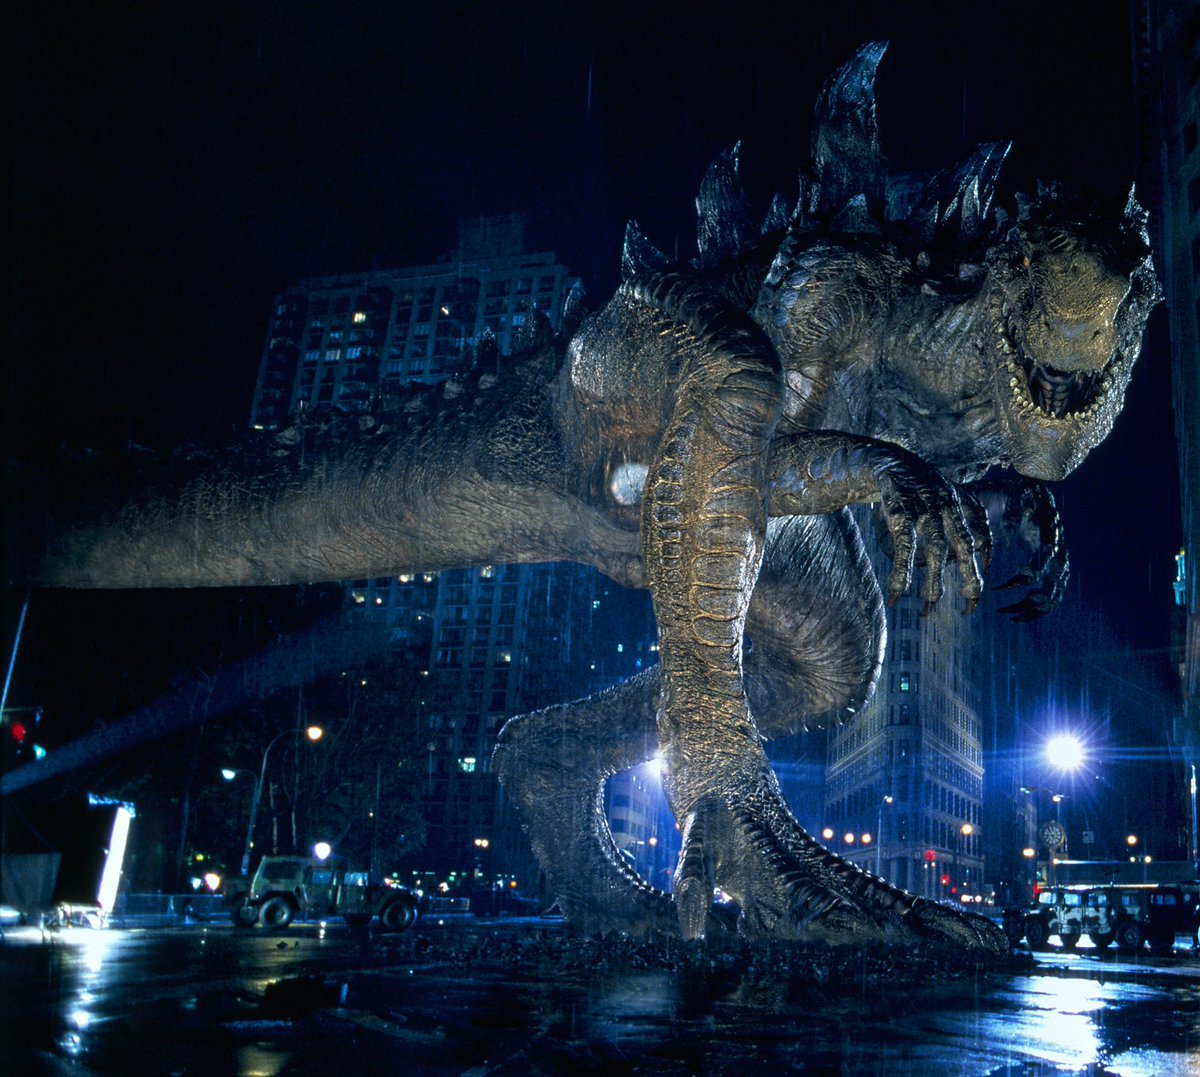 This design is like the most literal modernization of Godzilla for better or for worse if you know what I mean, since OG Goji is based on retrosaurs and this guy is very clearly based on modern reconstructions